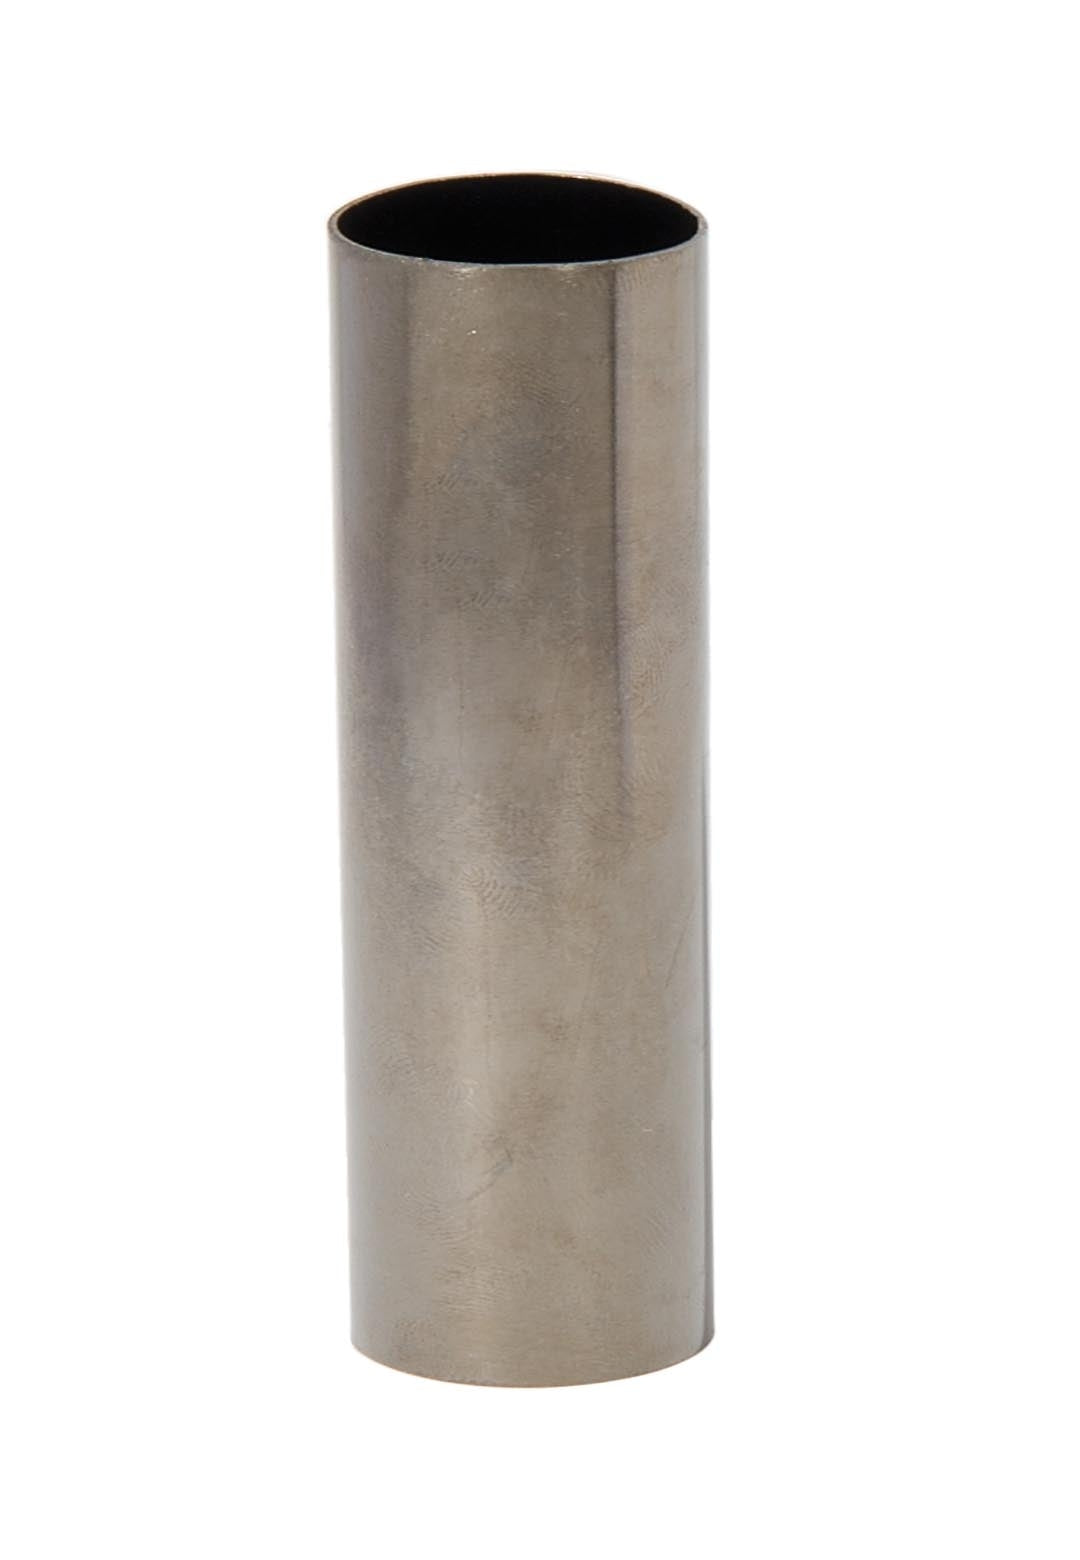 Seamless Unfinished Steel Medium Sized Candle Cover, Choice of Size